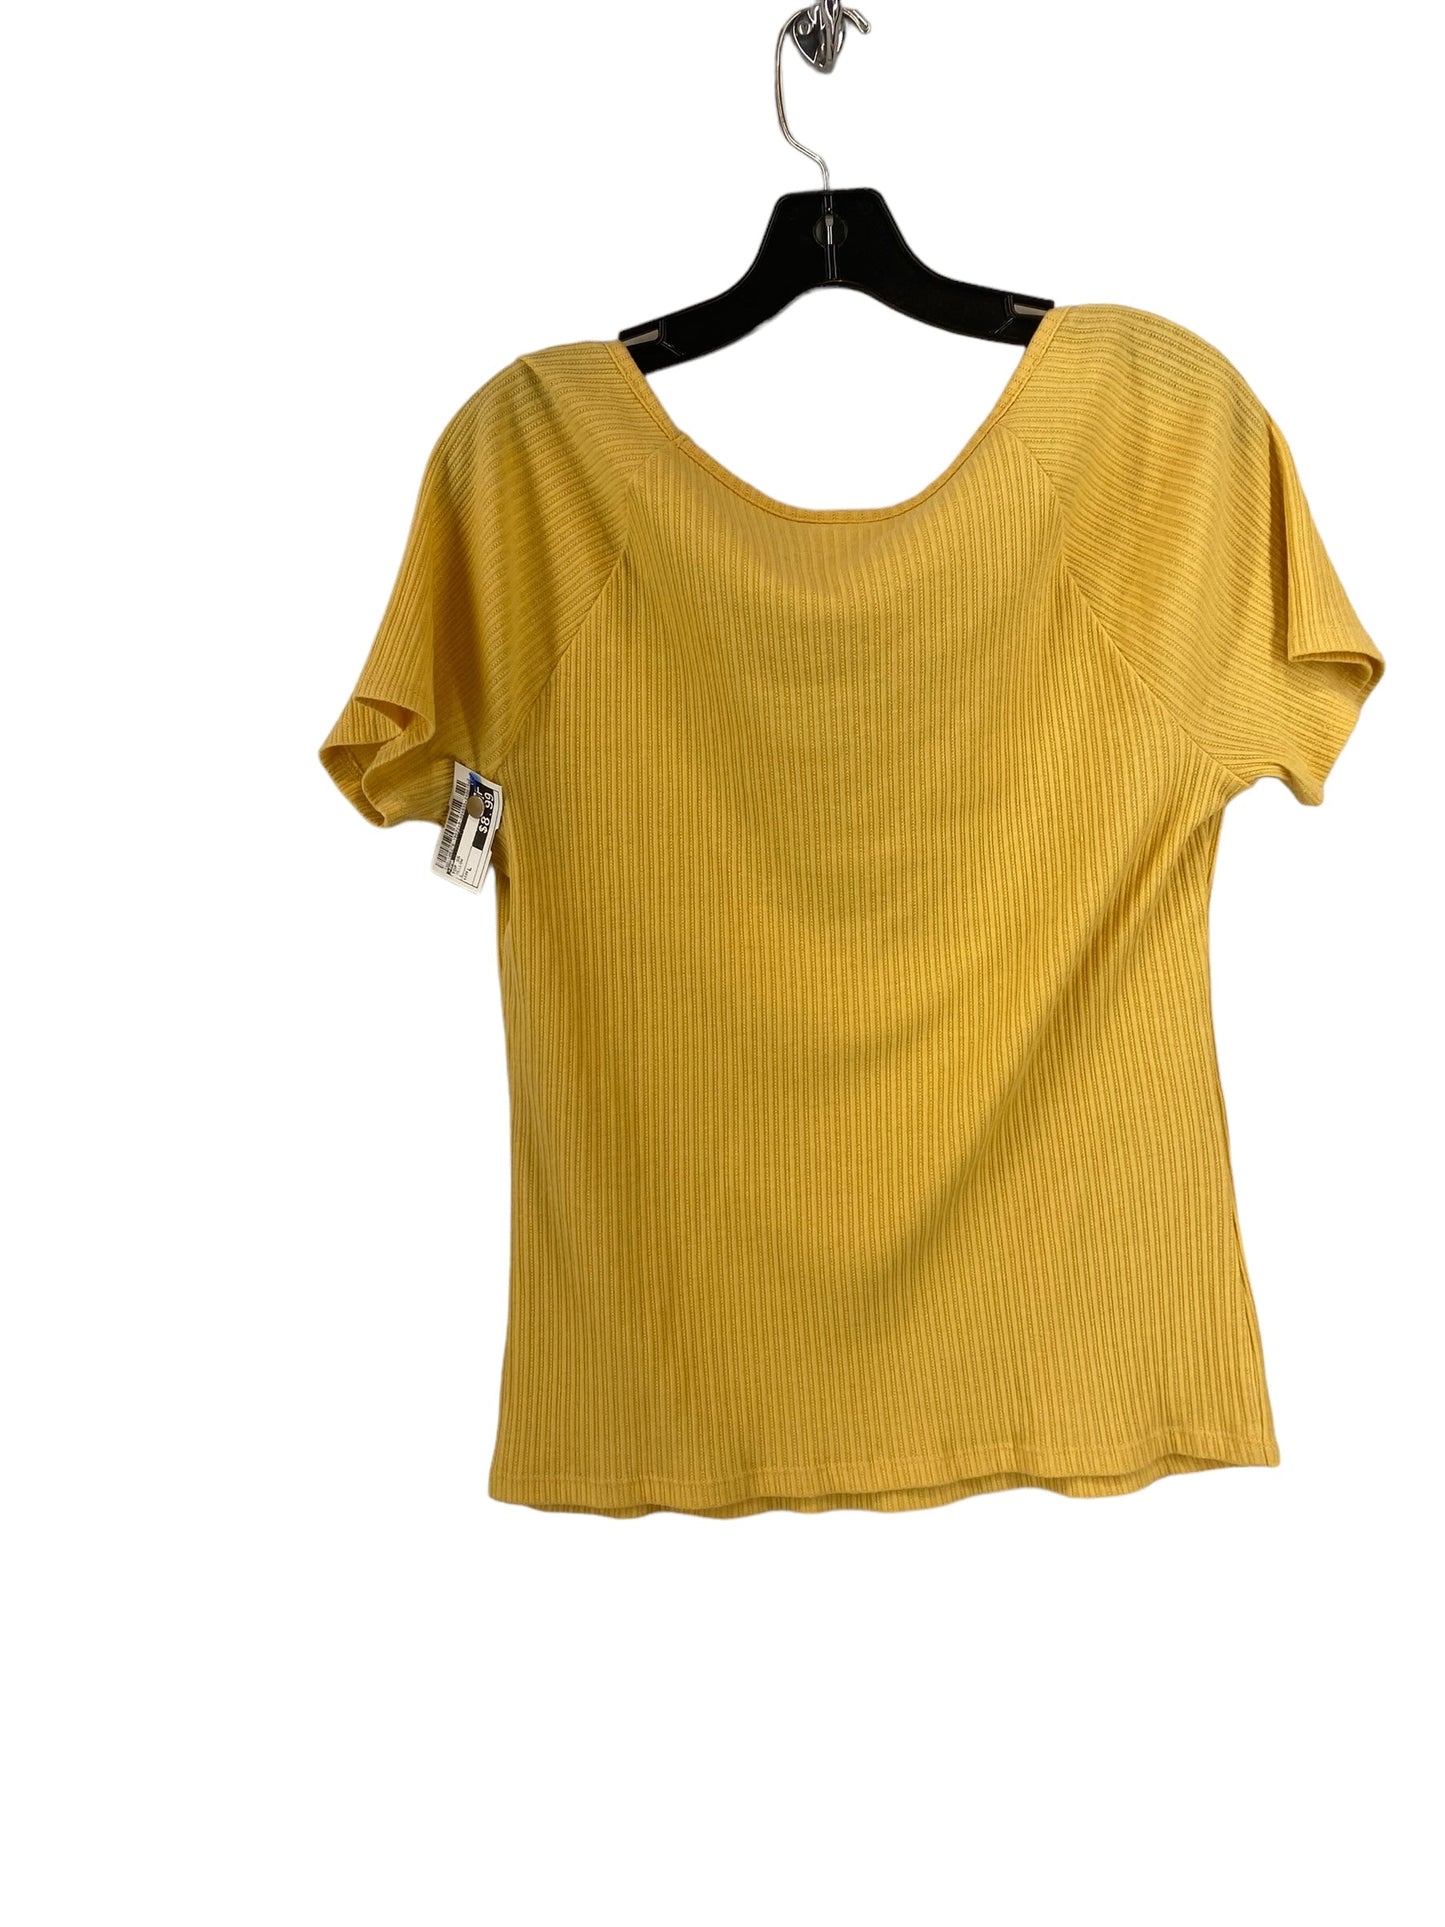 Yellow Top Short Sleeve Ana, Size L